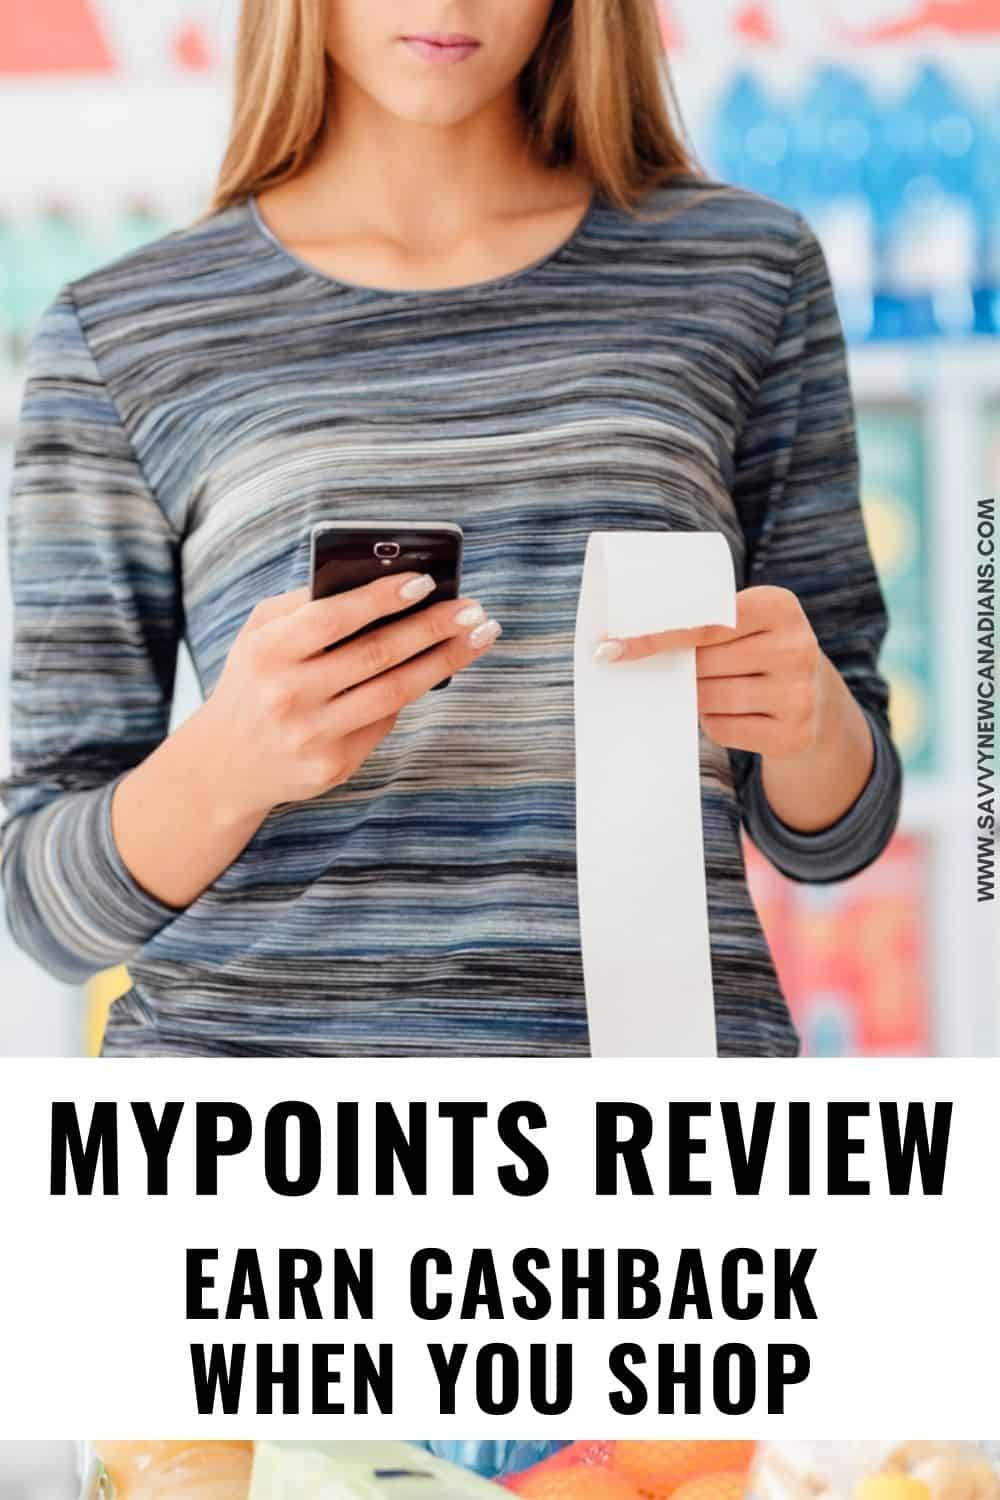 MyPoints Review 2022: Is it Legit and Safe?